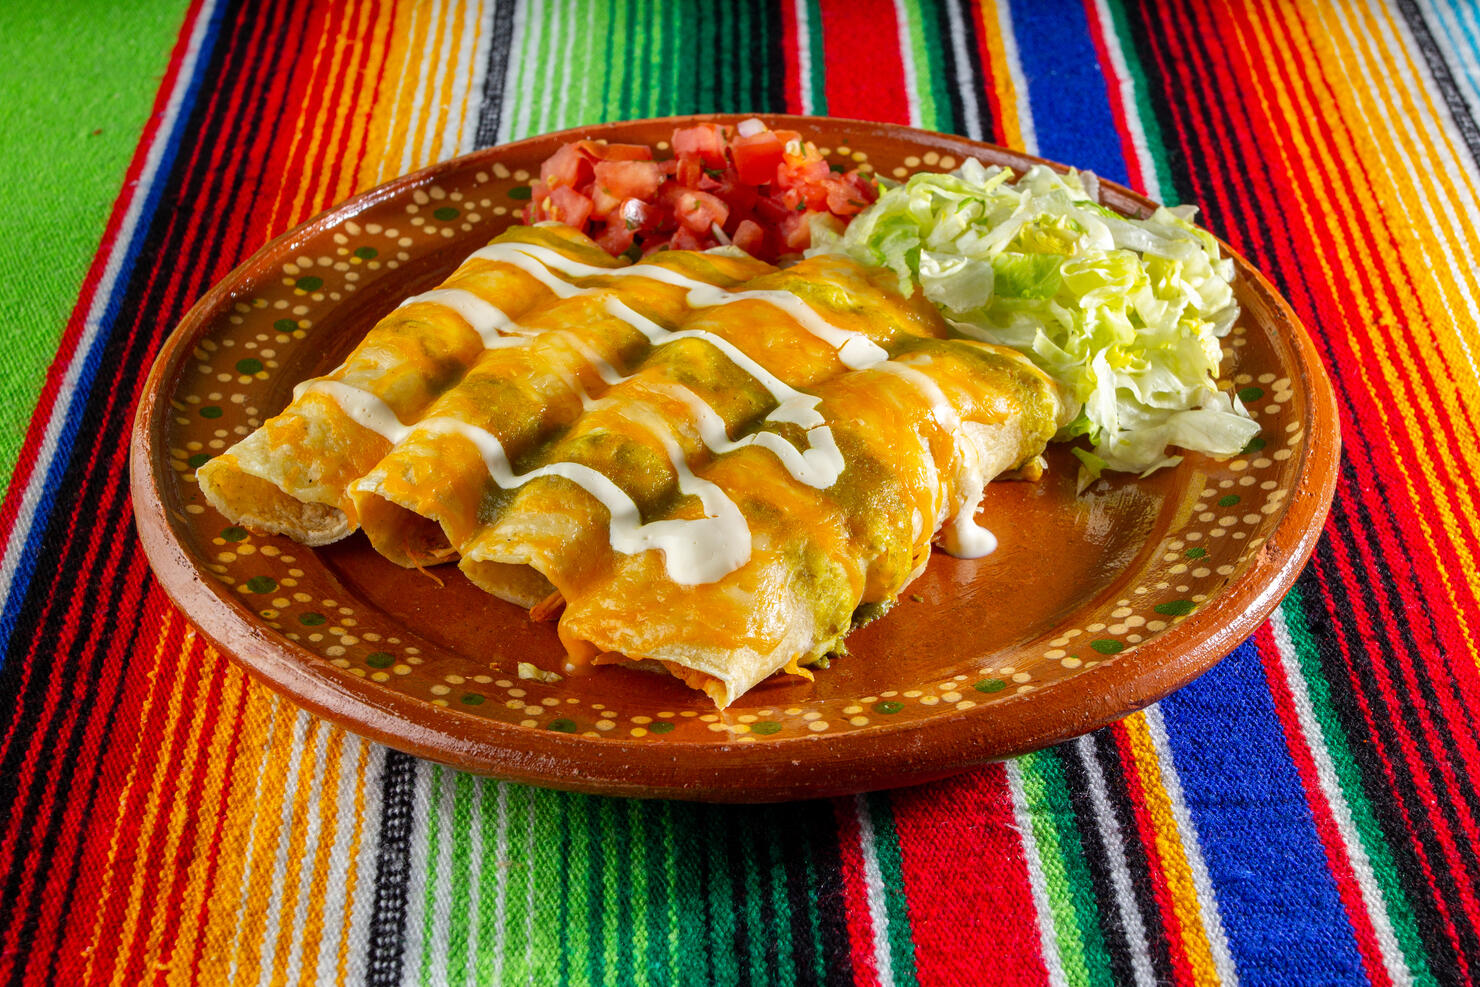 Mexican food,High angle view of food in plate on table,Massachusetts,United States,USA